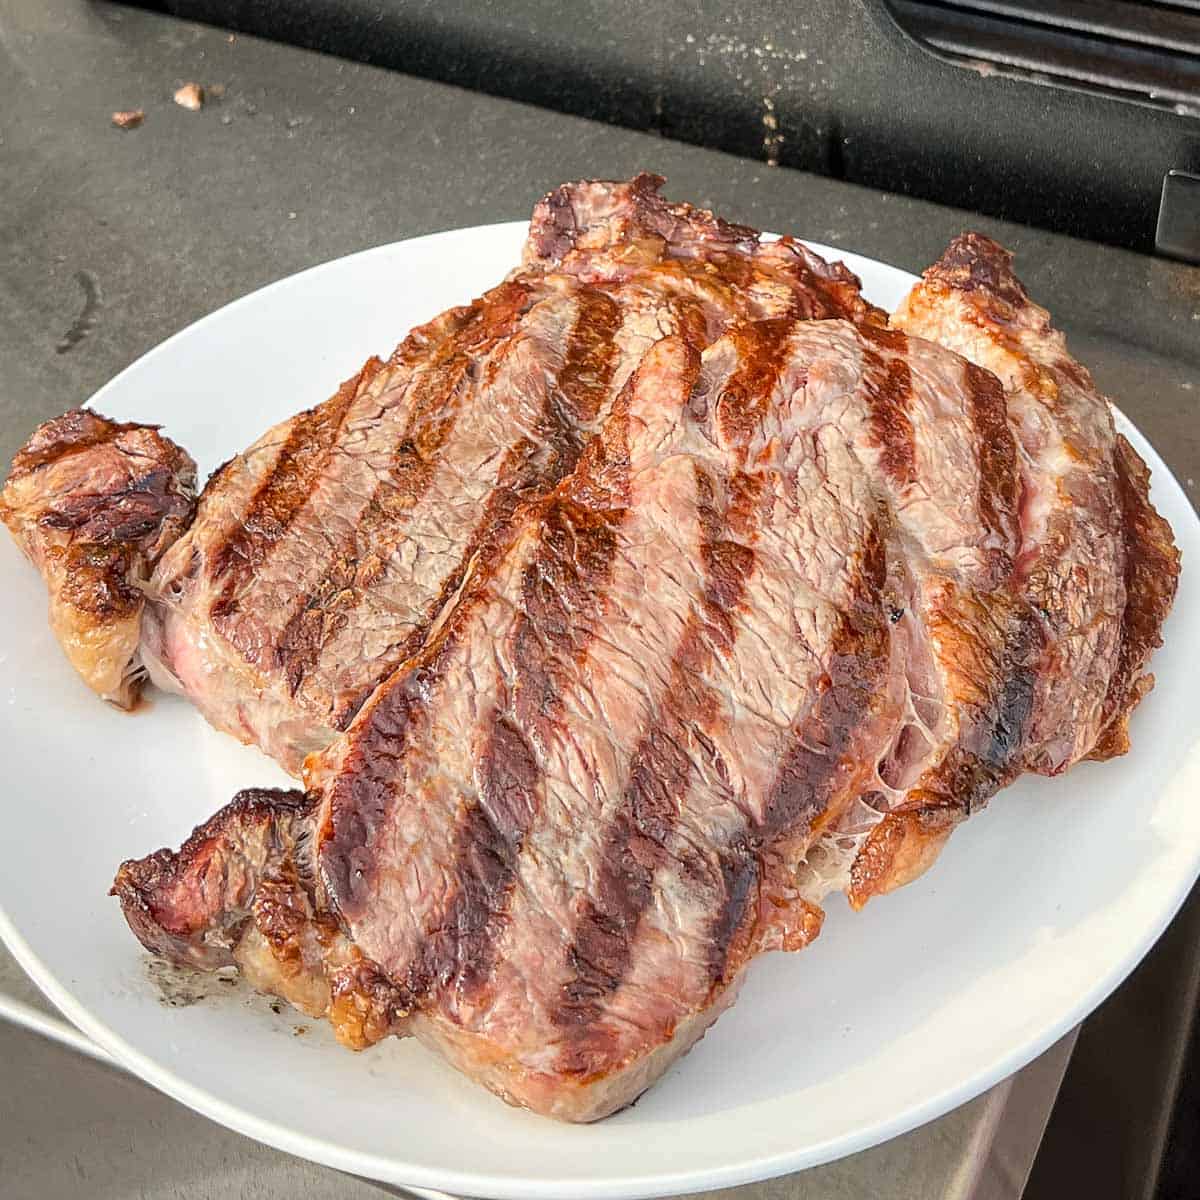 Grilled ribeye steaks just taken off the grill to rest.